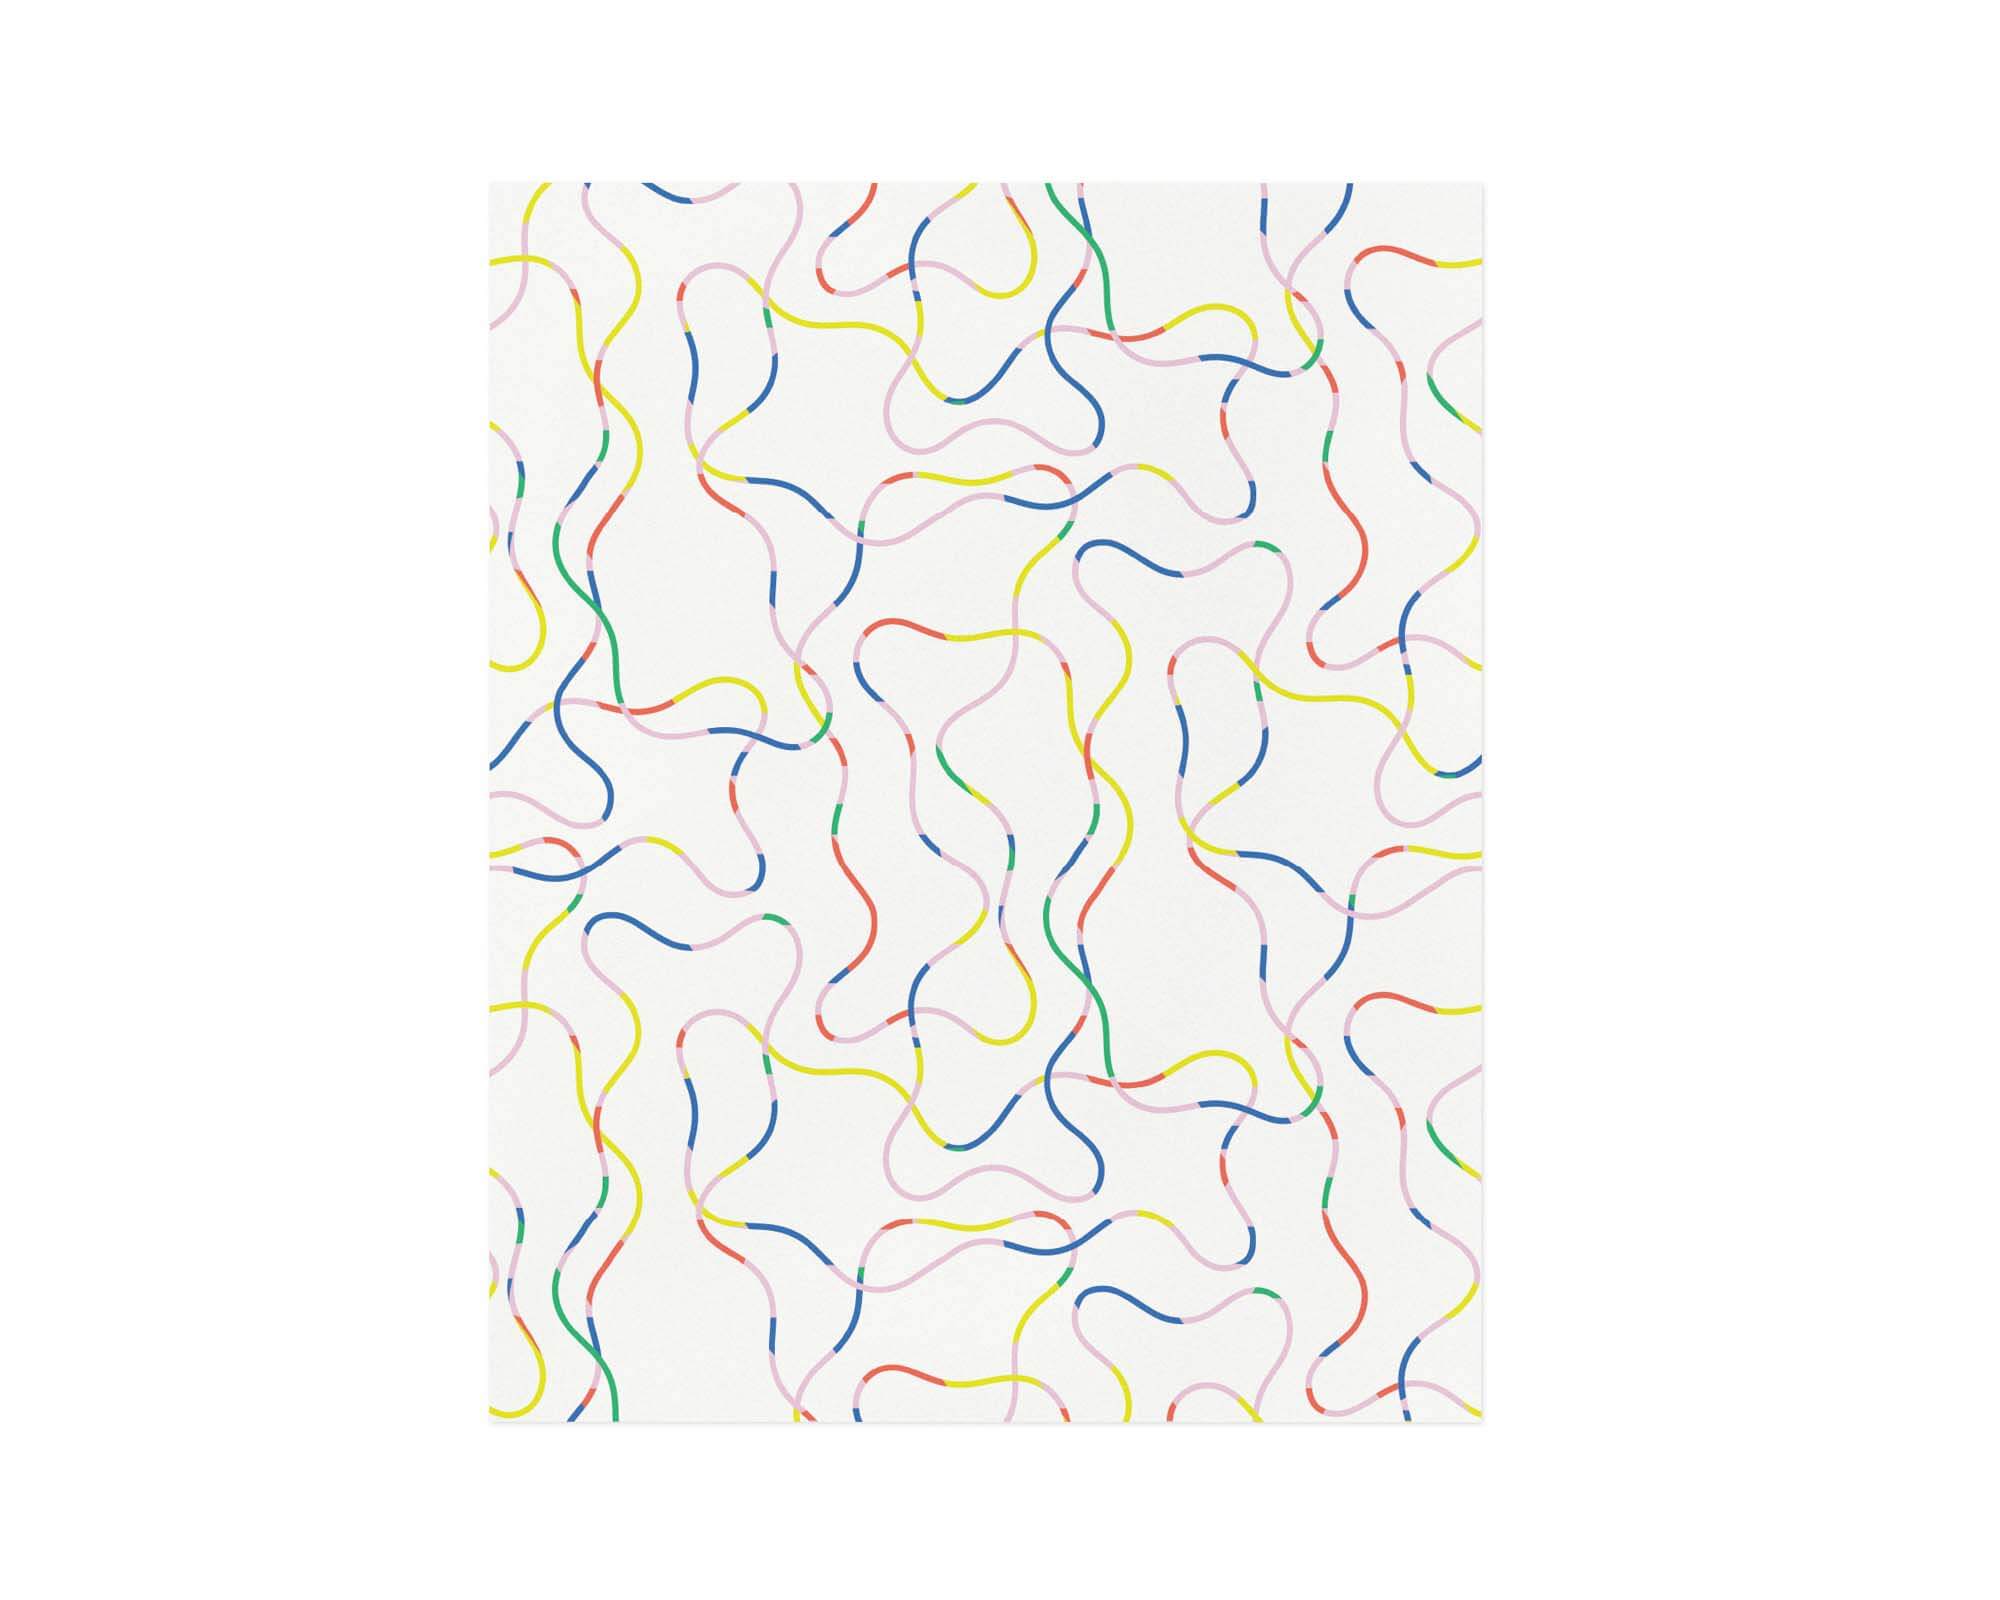 "Magic Pencil" graphic colorful rainbow squiggle pattern archival giclée modern art print. Made in USA by My Darlin' @mydarlin_bk